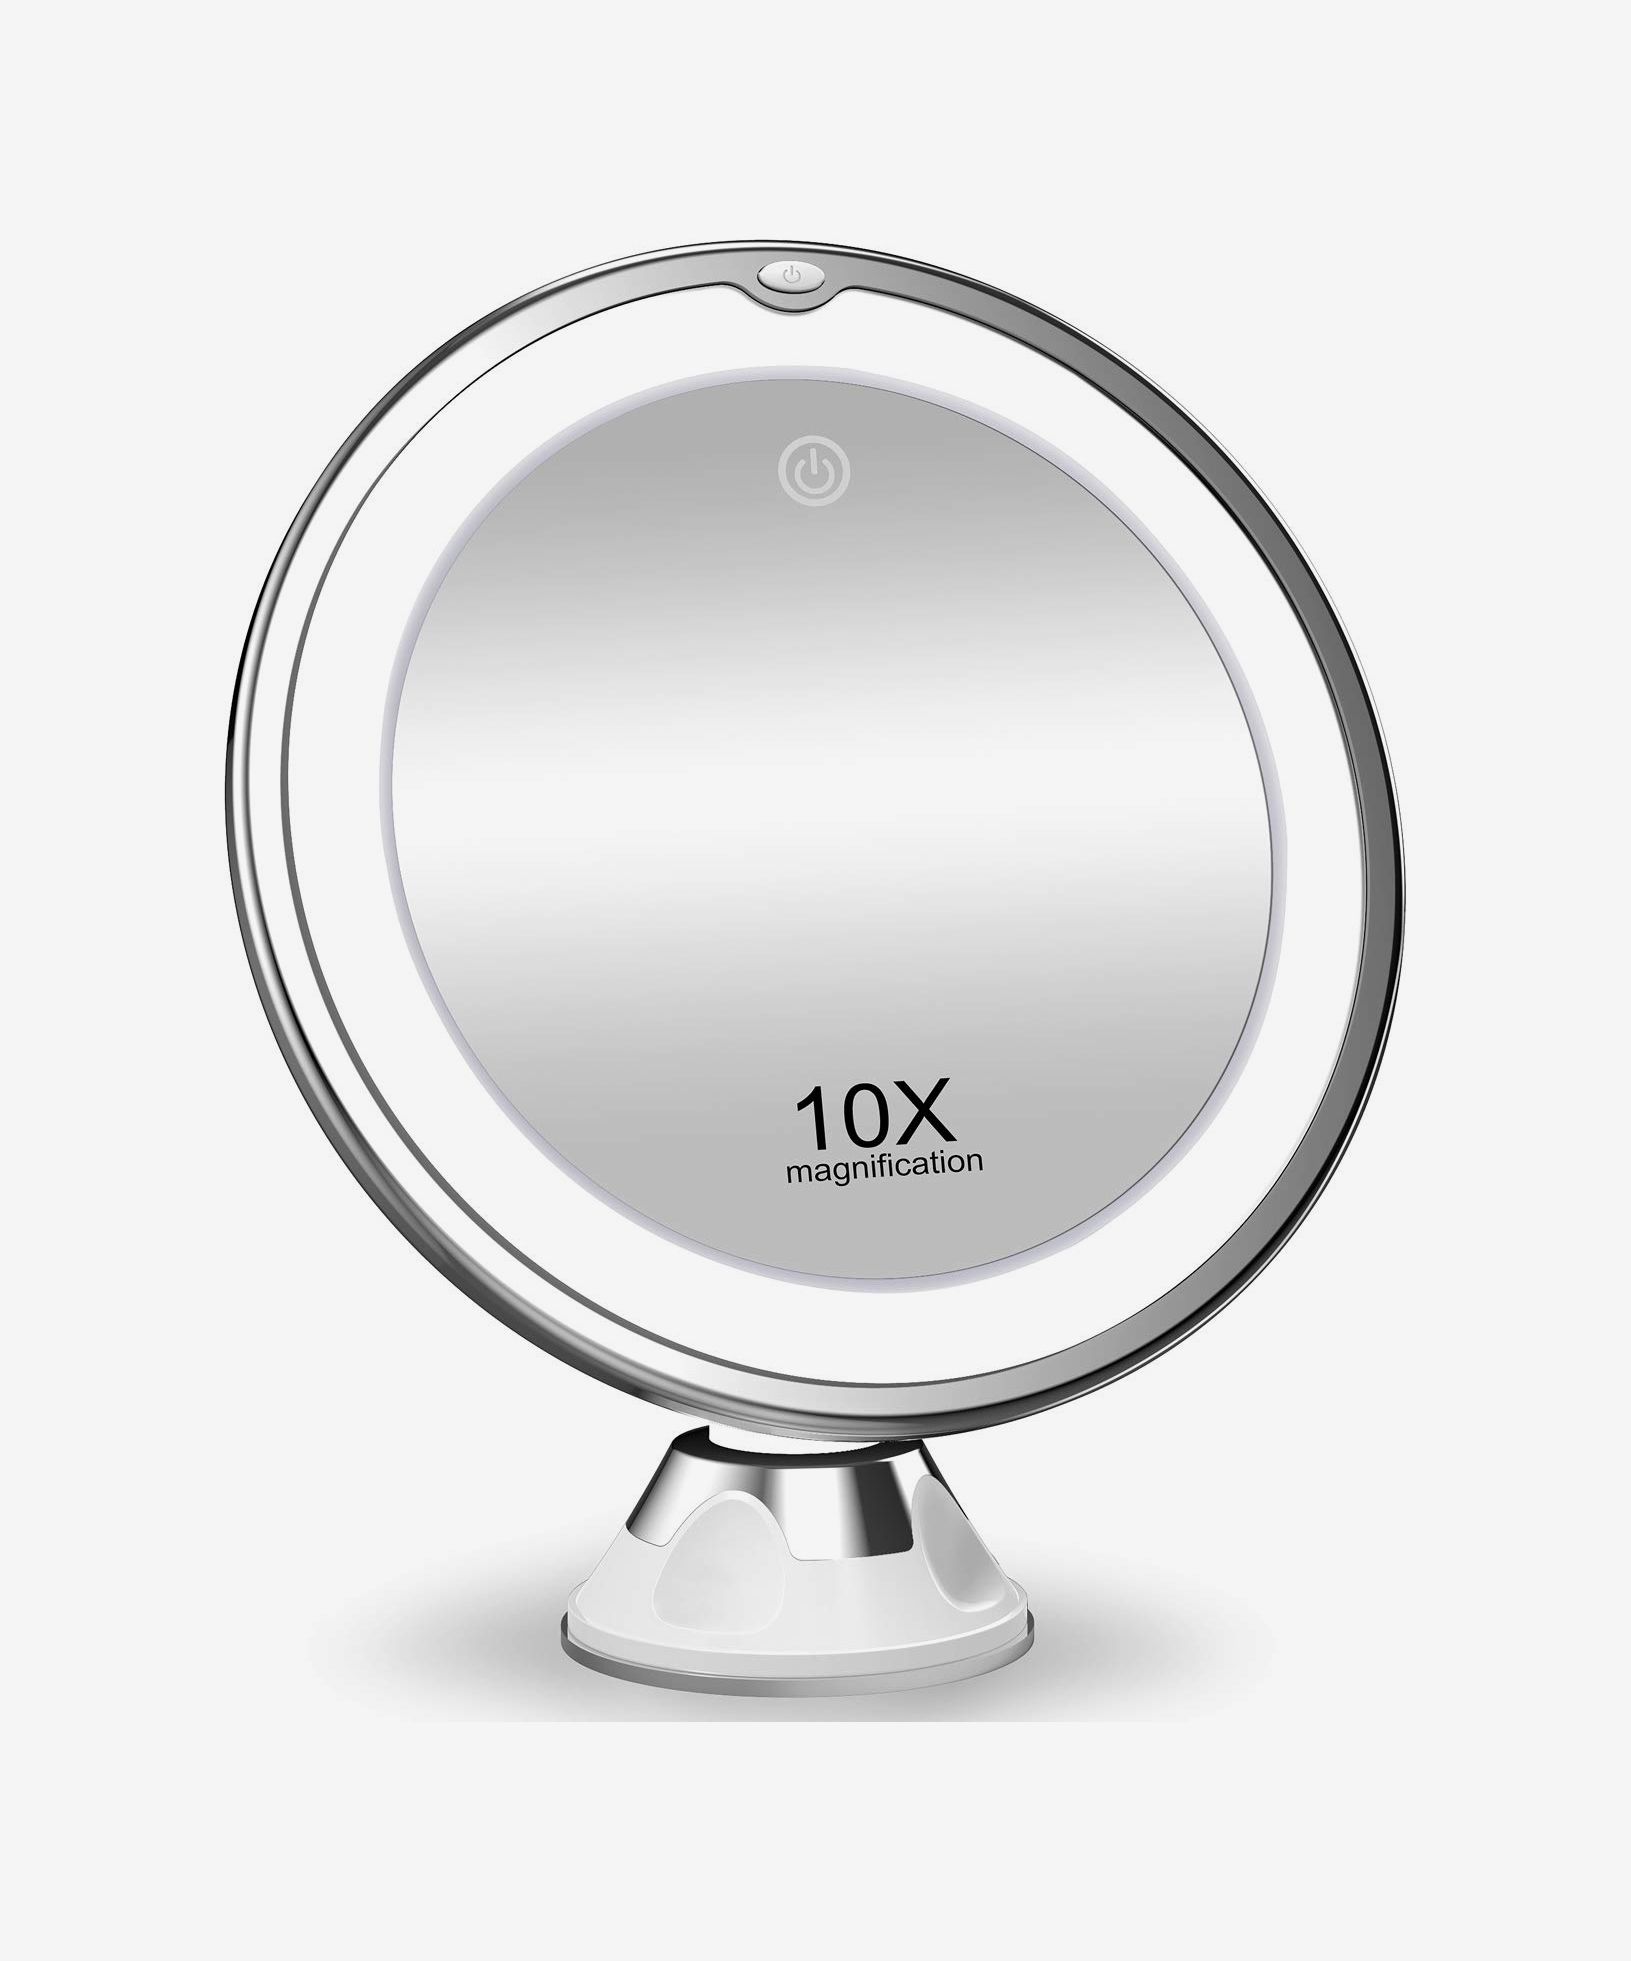 14 Best Lighted Makeup Mirrors 2021, Lighted Makeup Mirrors 10x